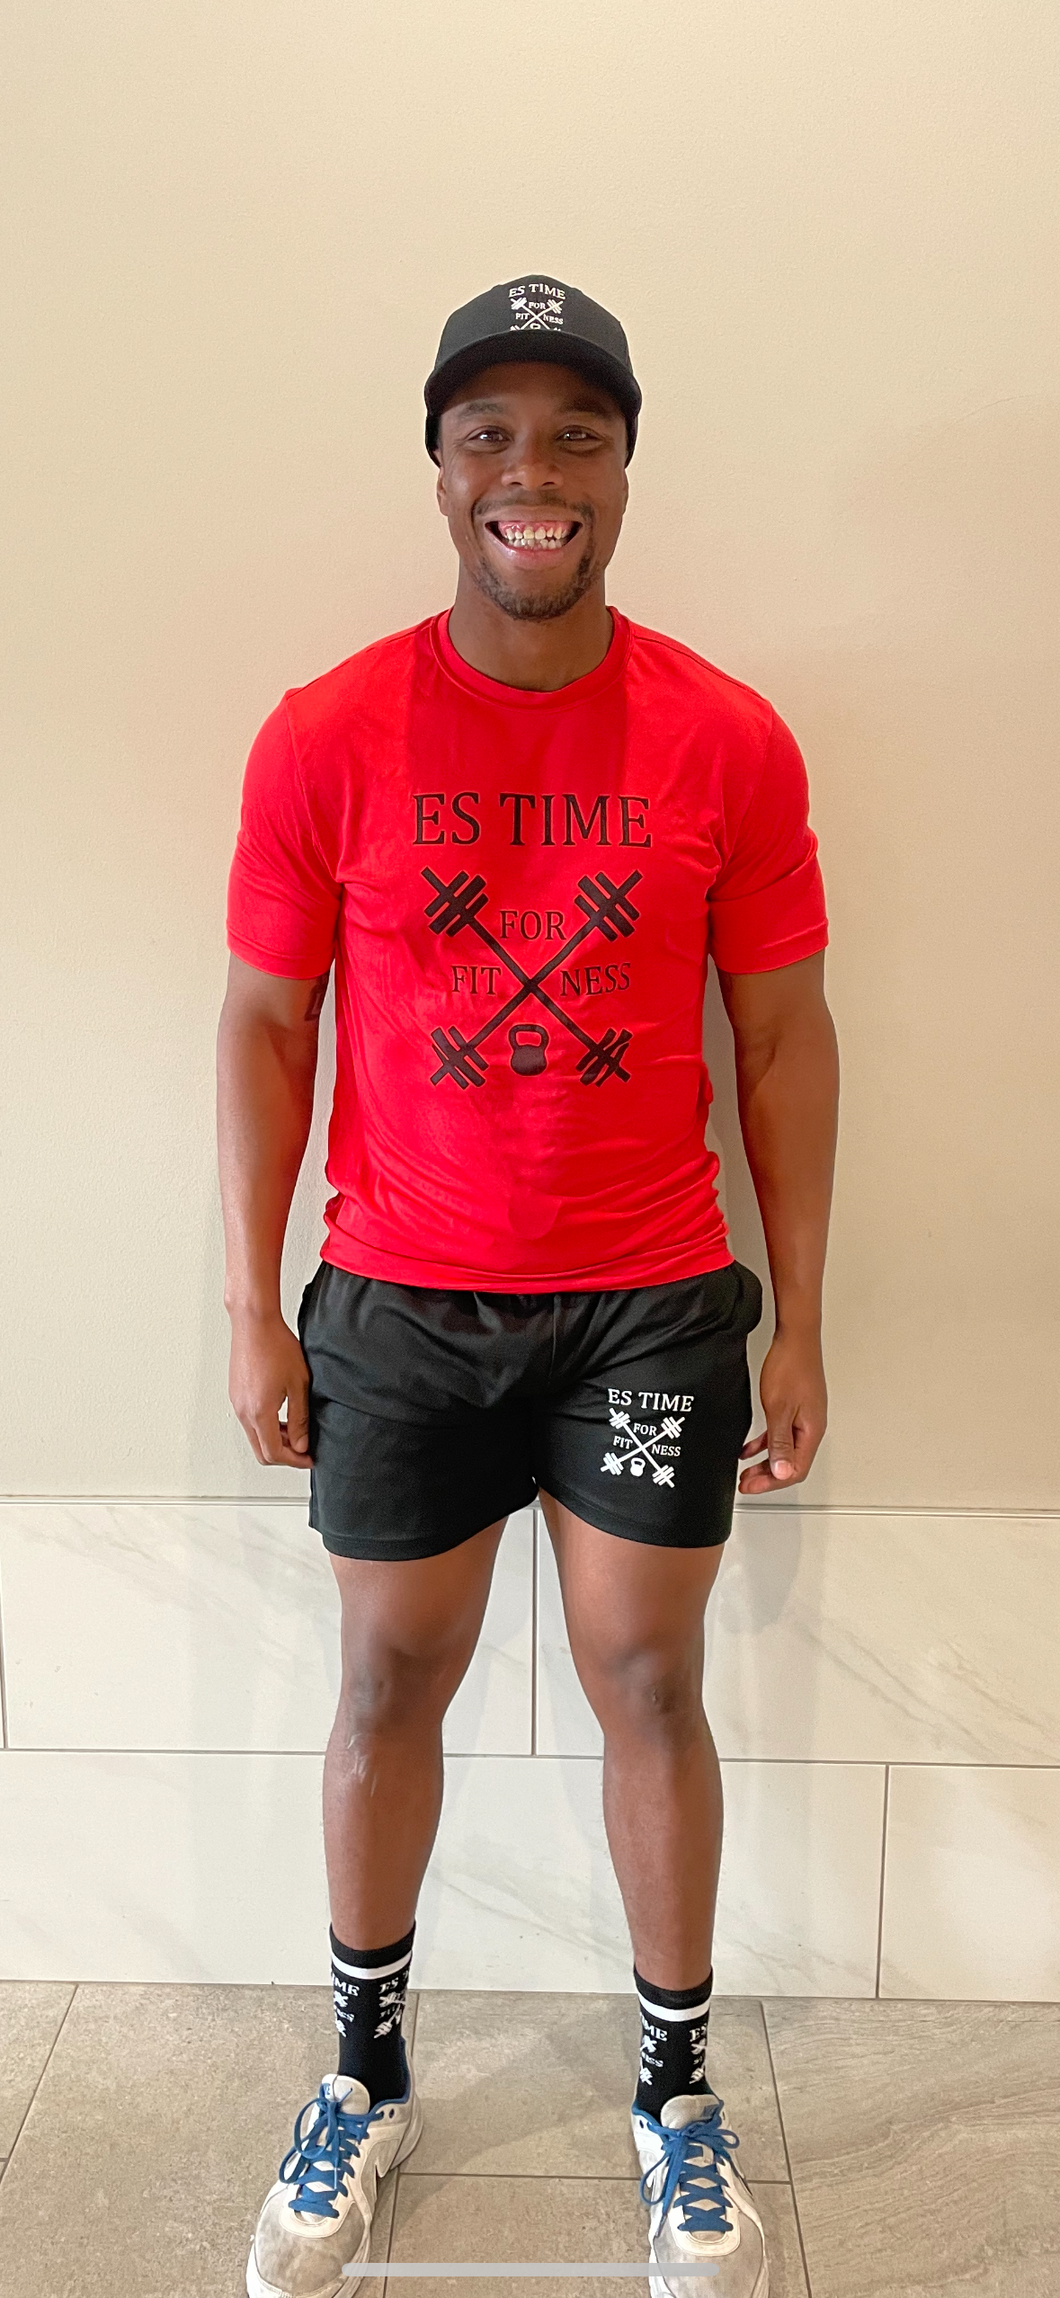 ES TIME FOR FITNESS Dri Fit Red Shirt Black Logo Different Sizes